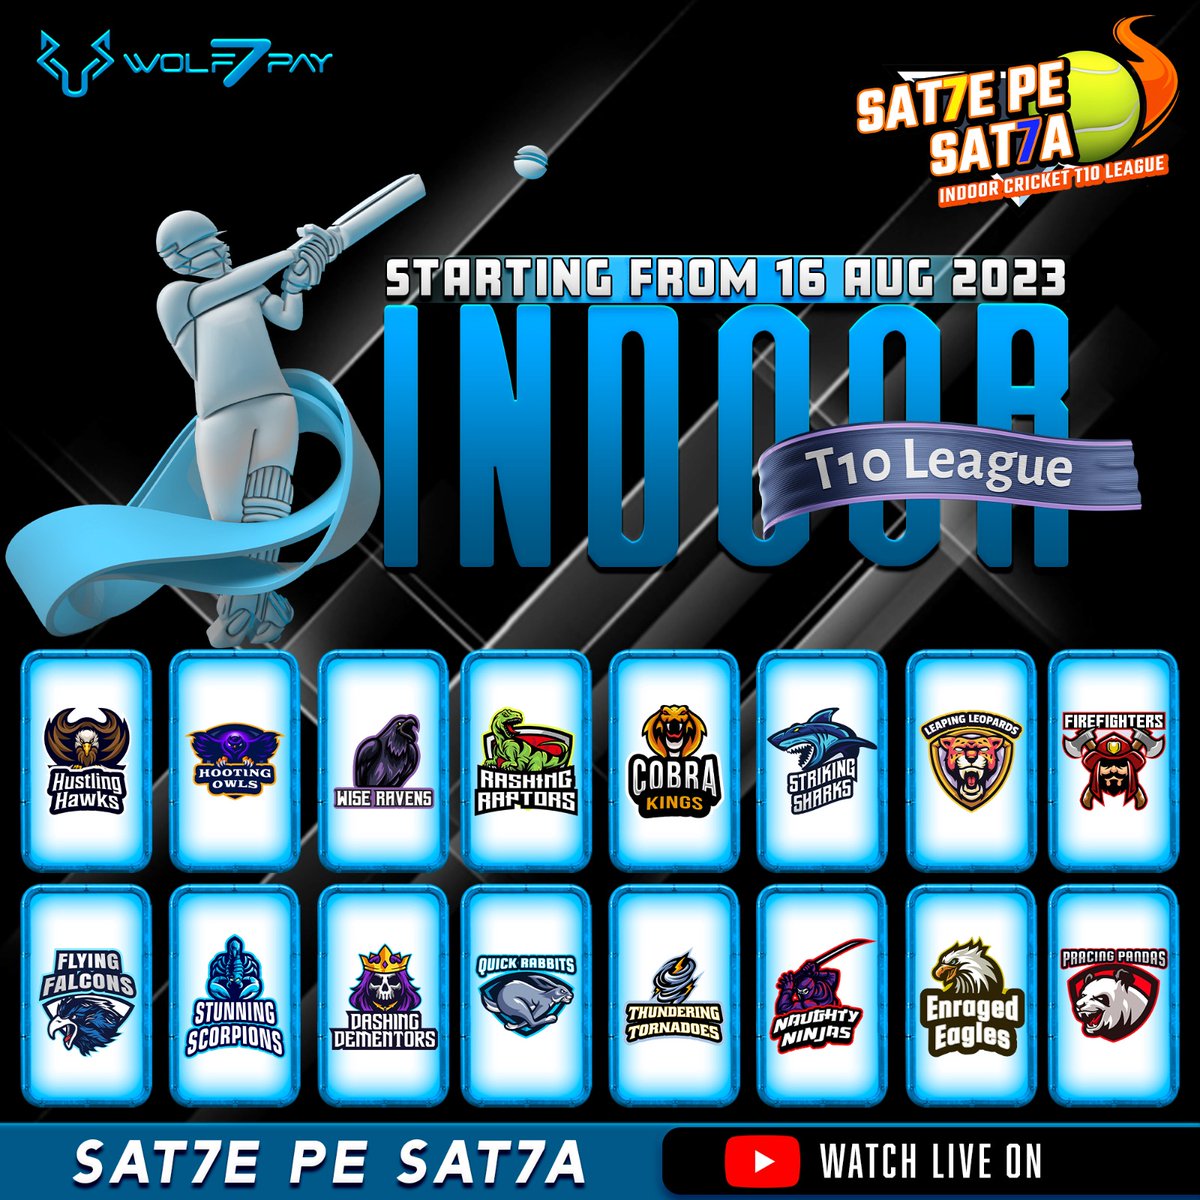 Sat7e pe sat7a - 
Indoor cricket T10 league  

Starting from - 16th august 2023  

Watch live on you tube  

#wolf7pay #indoorcricket #t10 #cricket #sports #graphicdesign #digitalart #creative #art #live #cricfever #leaguecricket #boxcricketleague #joinus